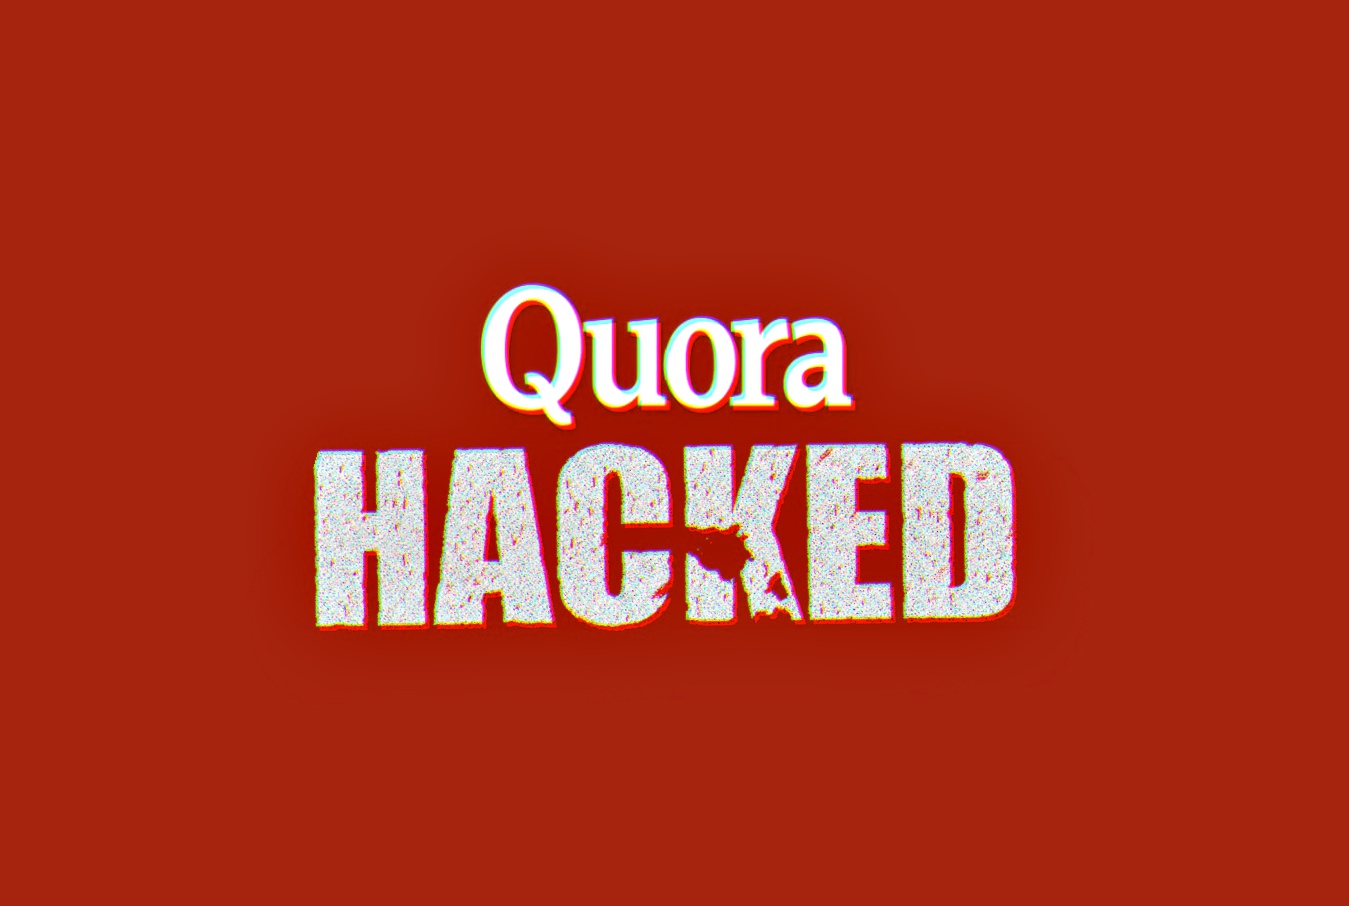 Quora hacked: Personal data of 100 million users stolen